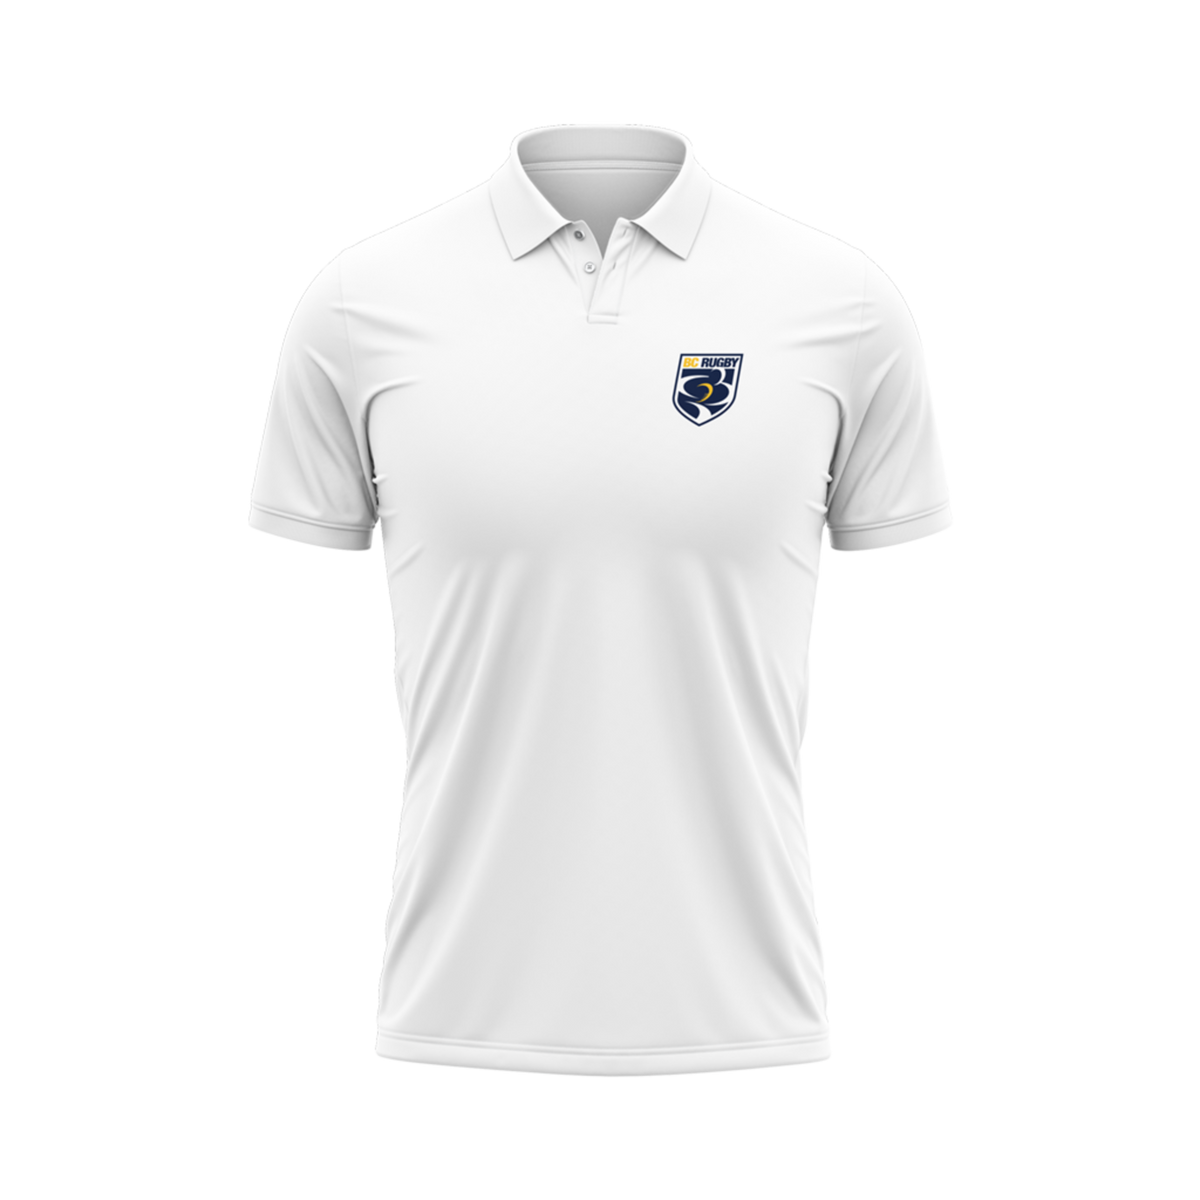 BC Rugby 2022 Polo - www.therugbyshop.com www.therugbyshop.com MEN&#39;S / WHITE W/ SHIELD / S XIX Brands TEES BC Rugby 2022 Polo